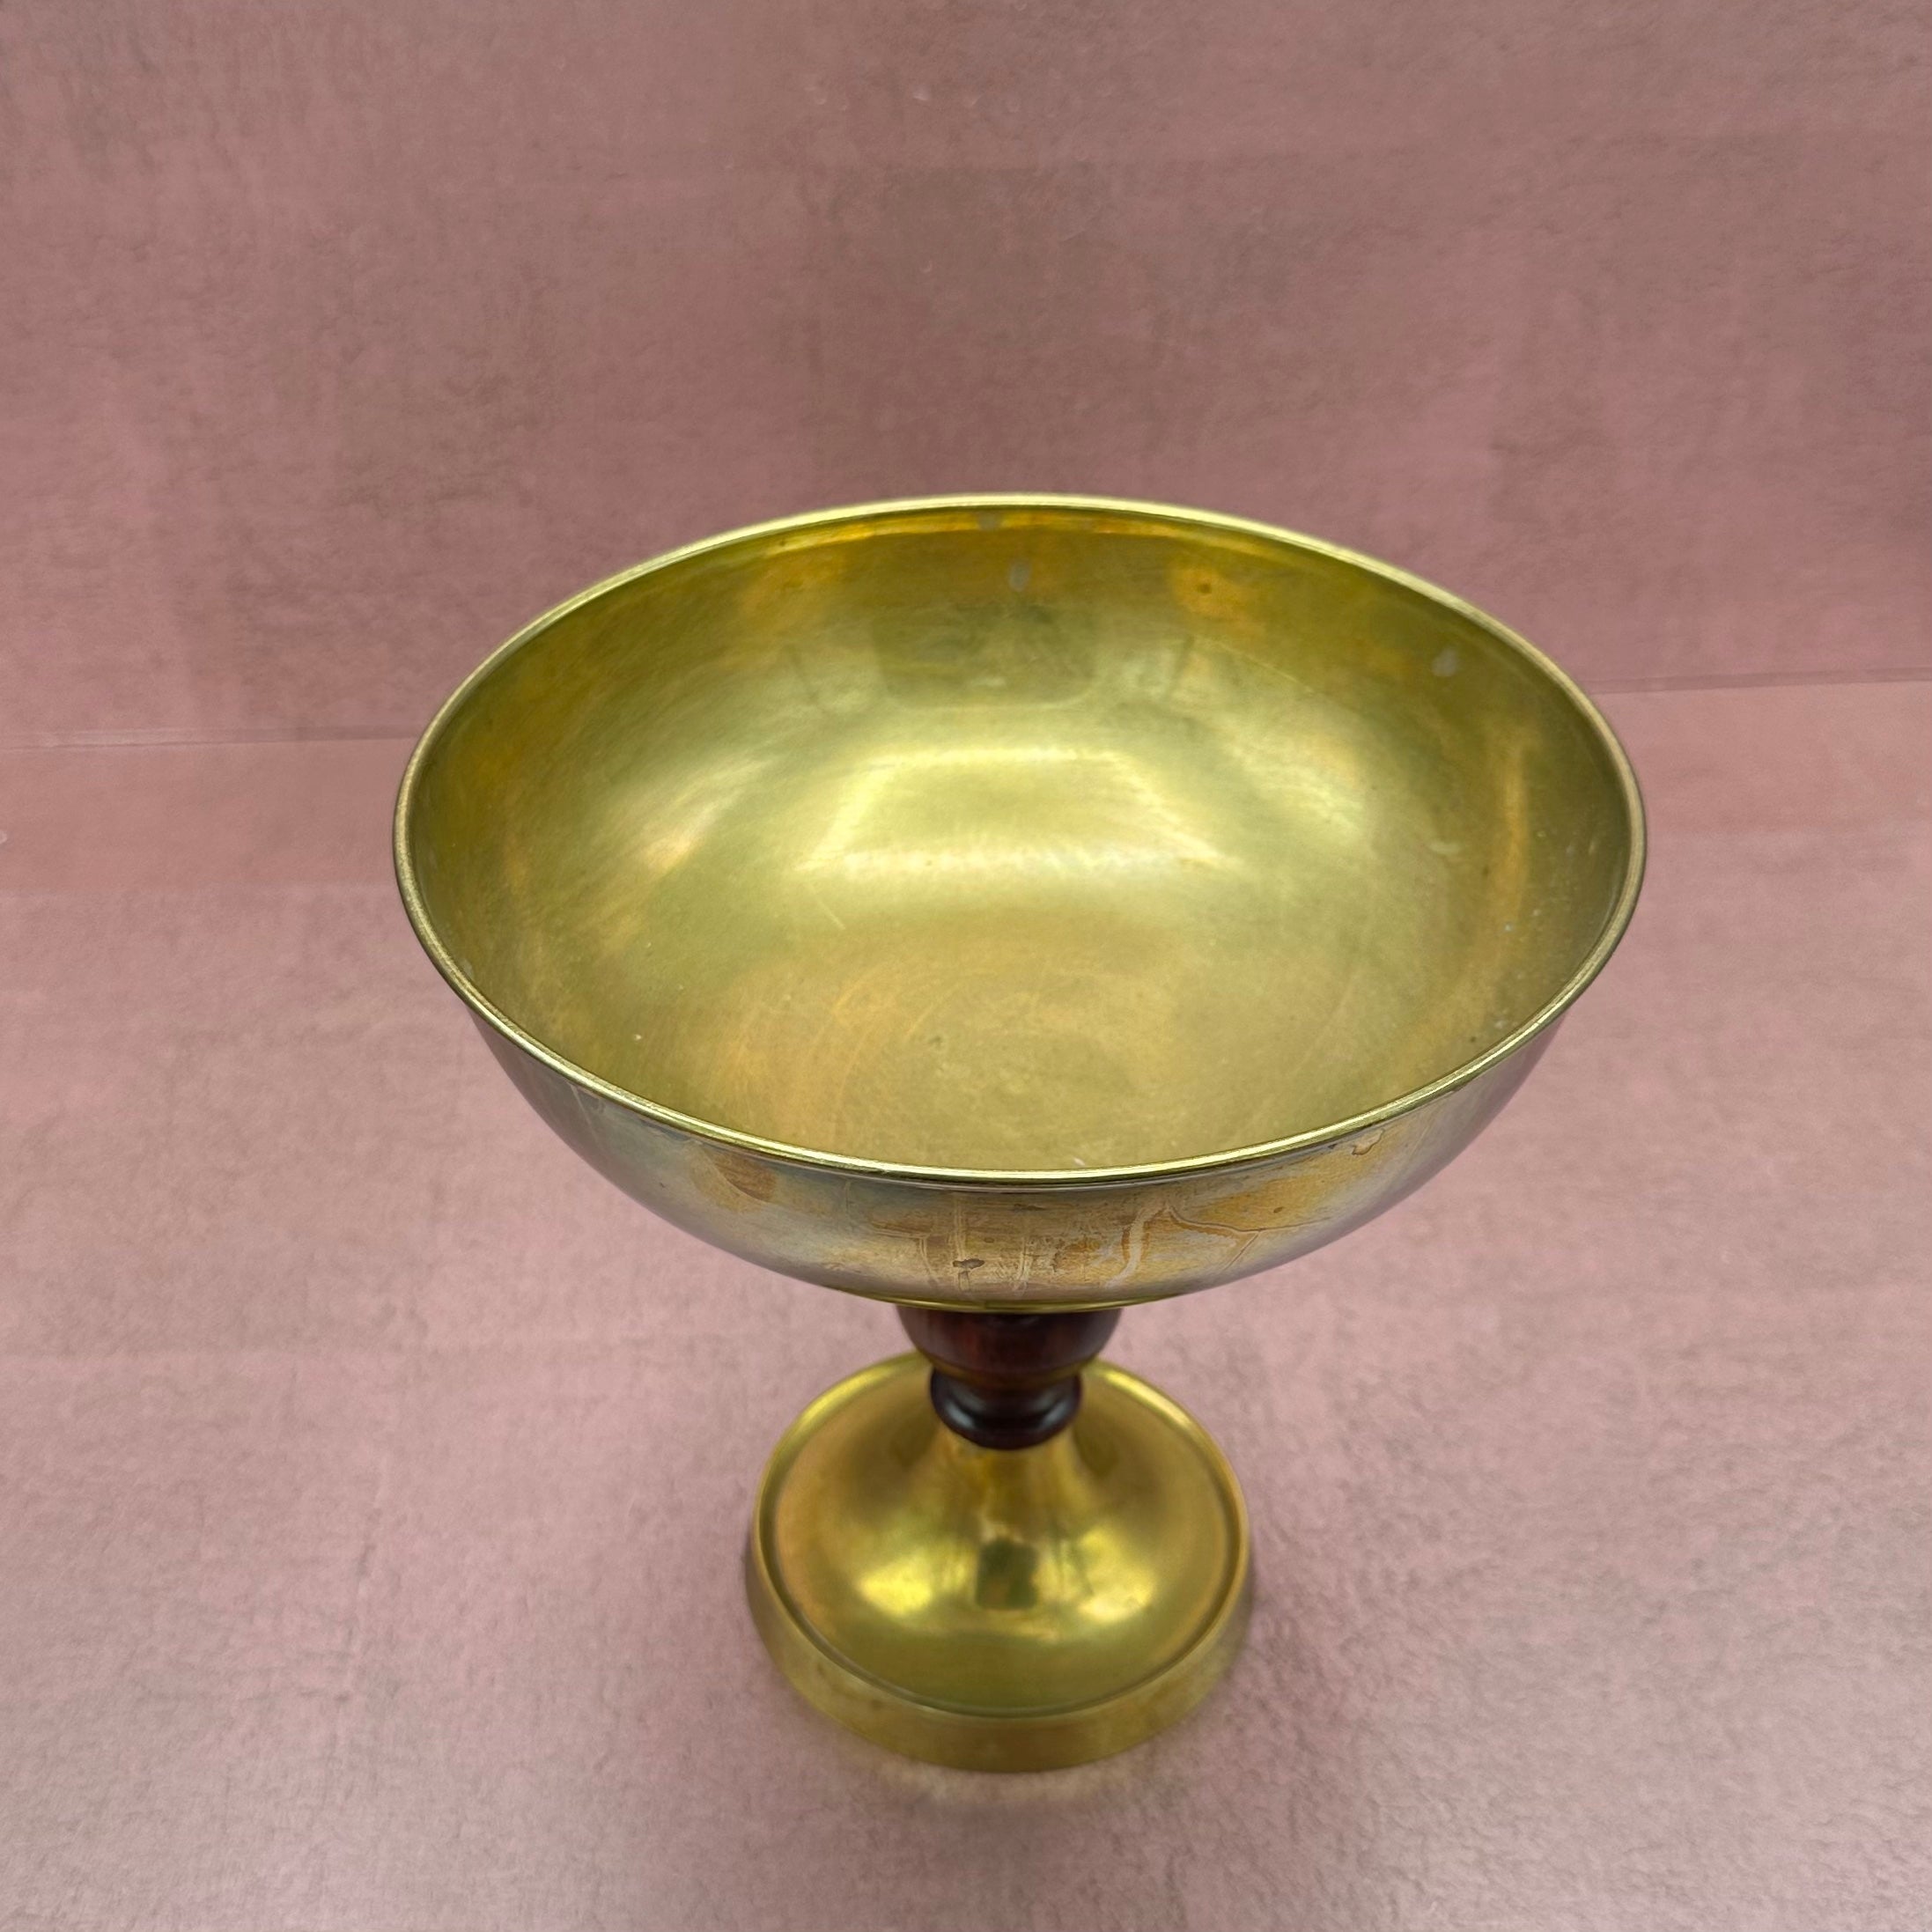 Brass & Wood Compote